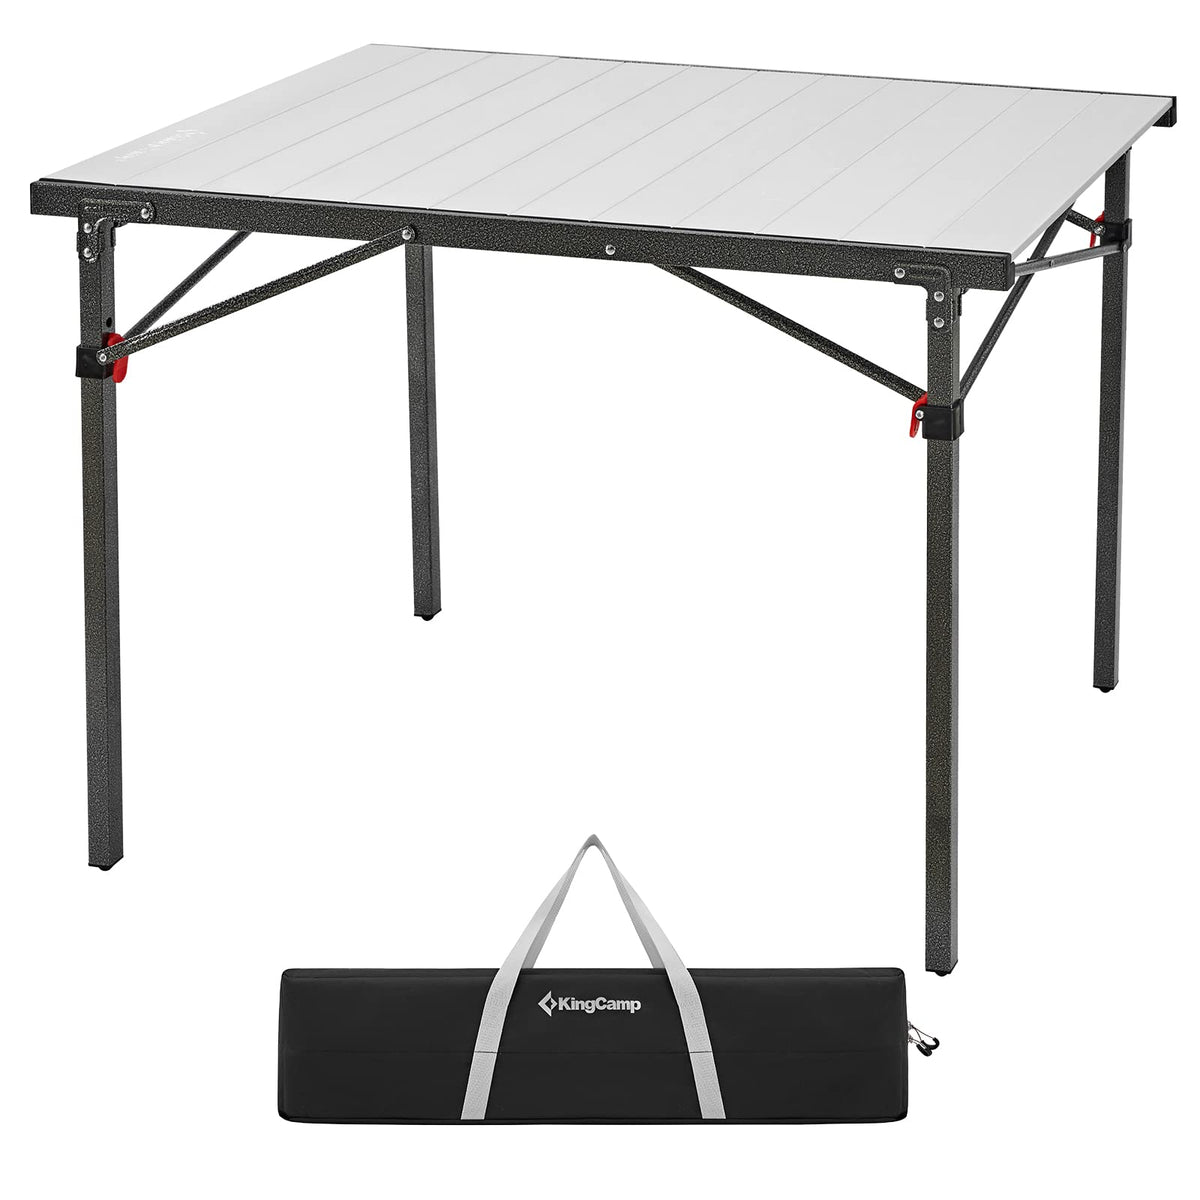 KingCamp Table,Foldable Camping Table,Camping Table,Lightweight